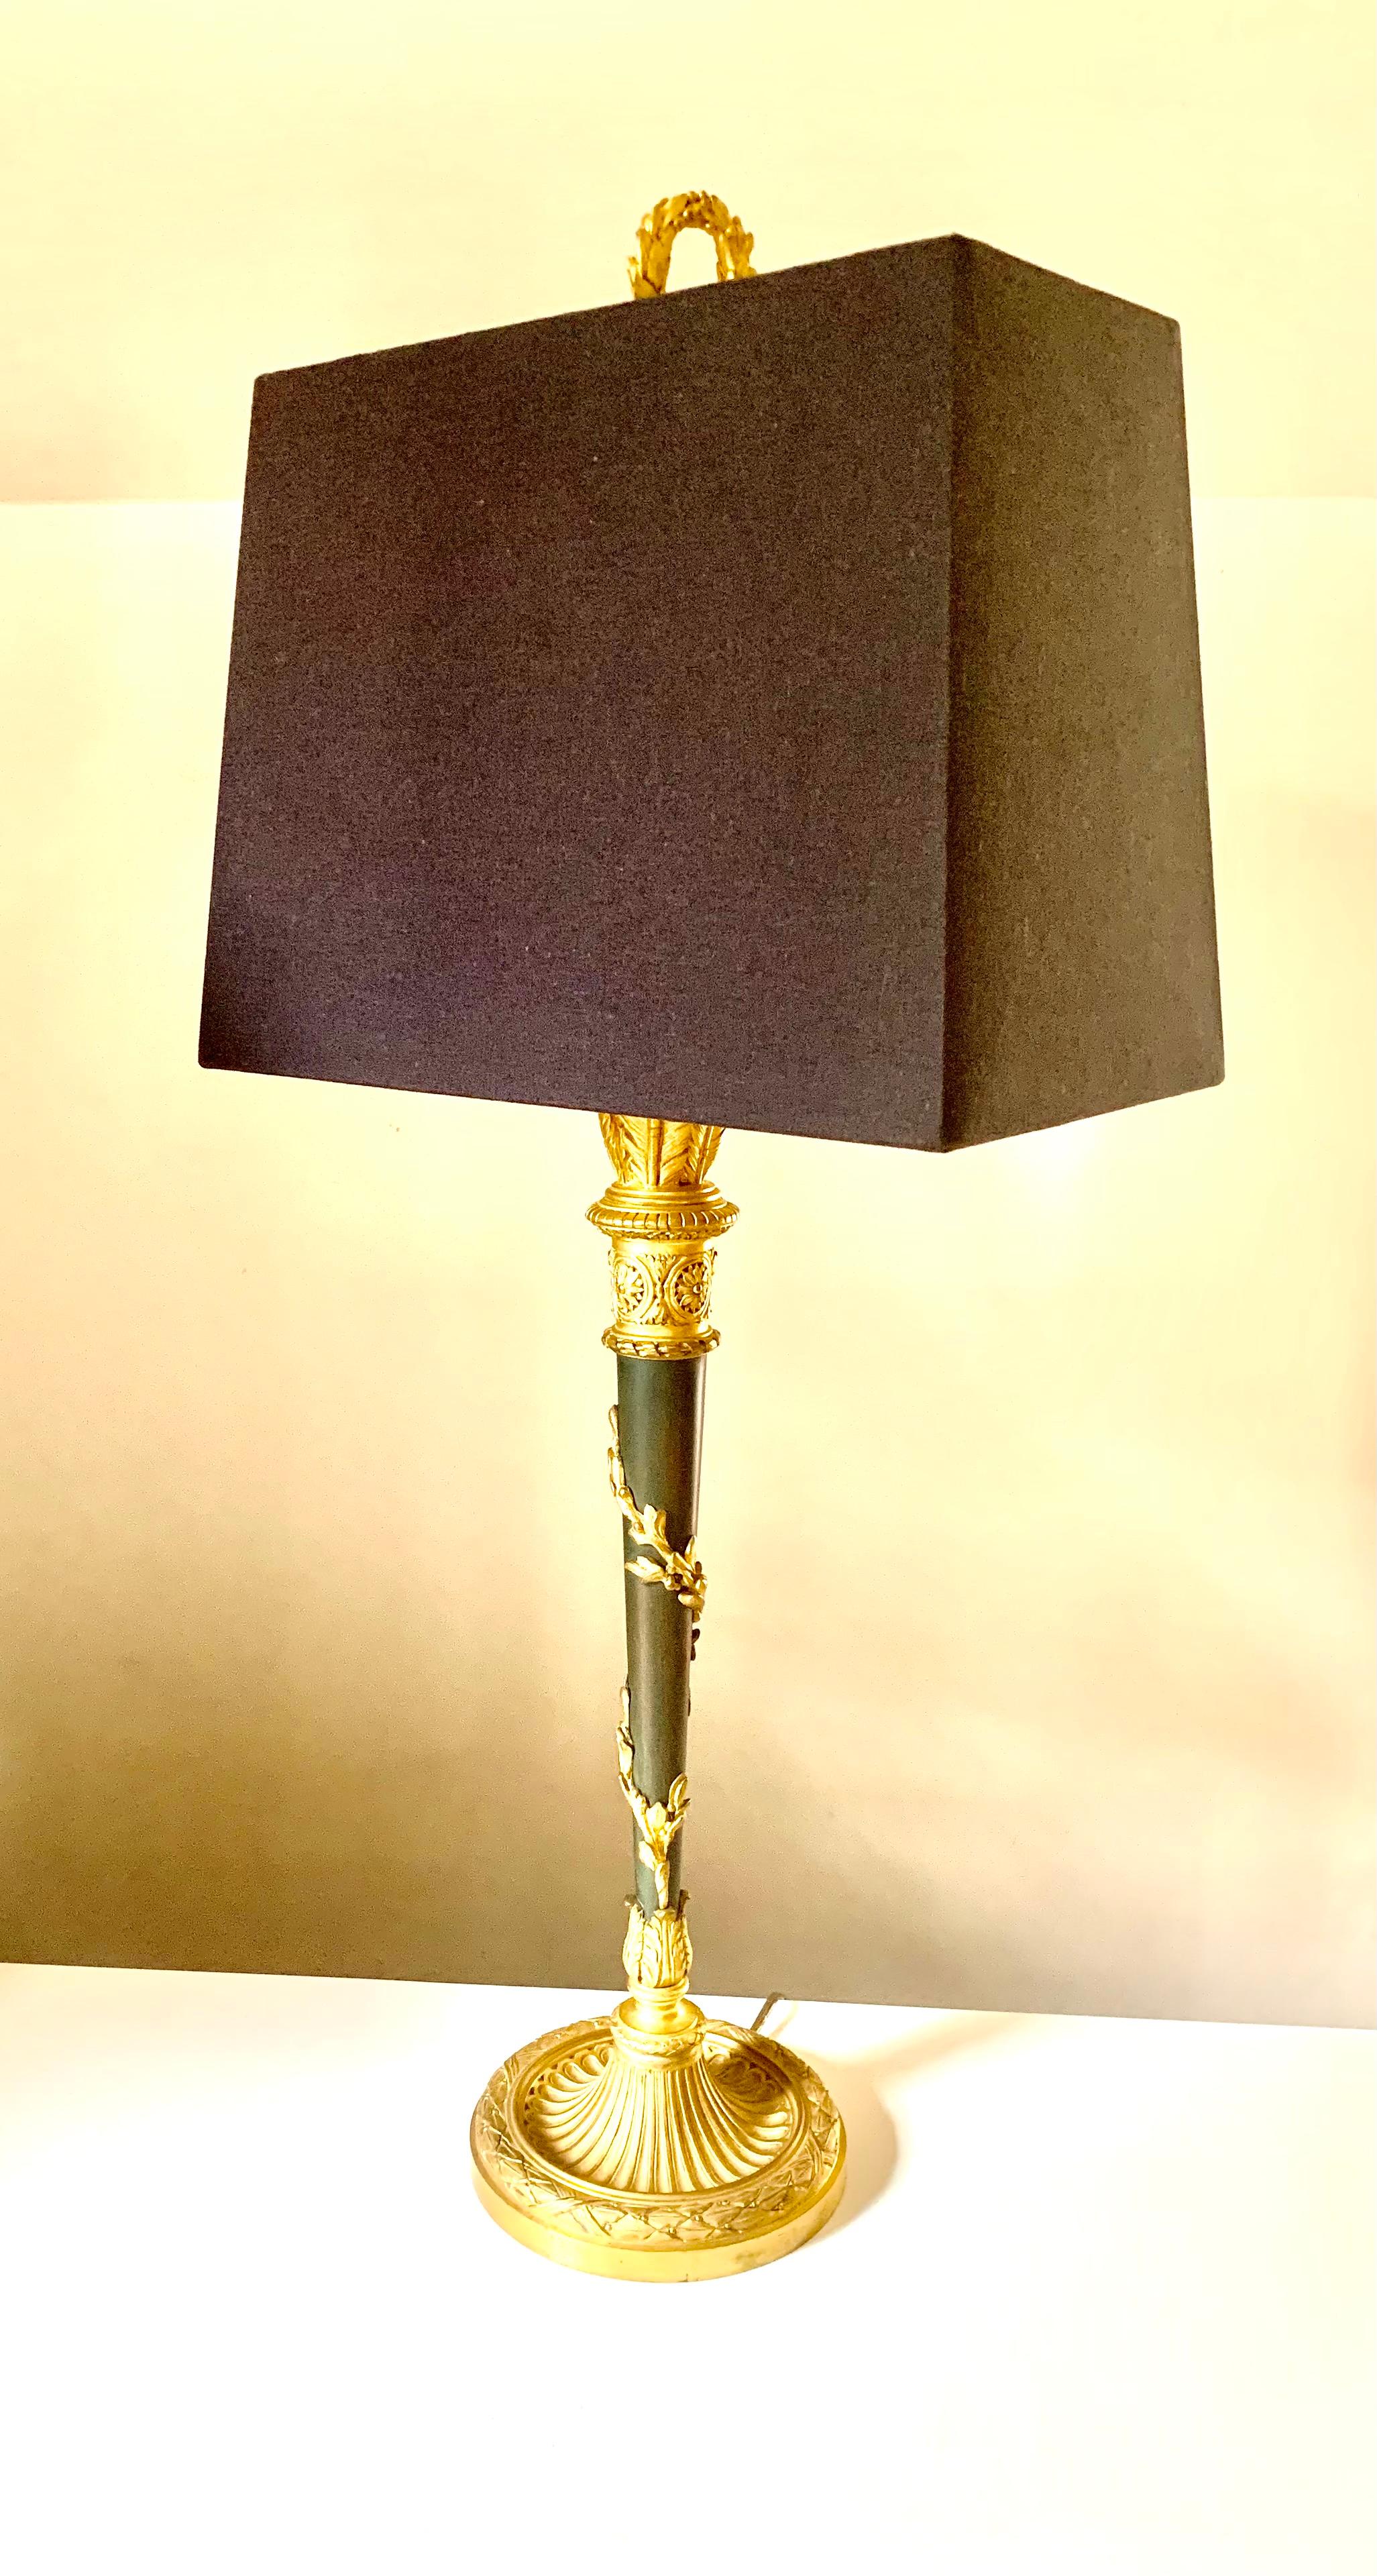 Fine Antique French Neoclassical Style Gilt and Patinated Bronze Desk Lamp For Sale 2